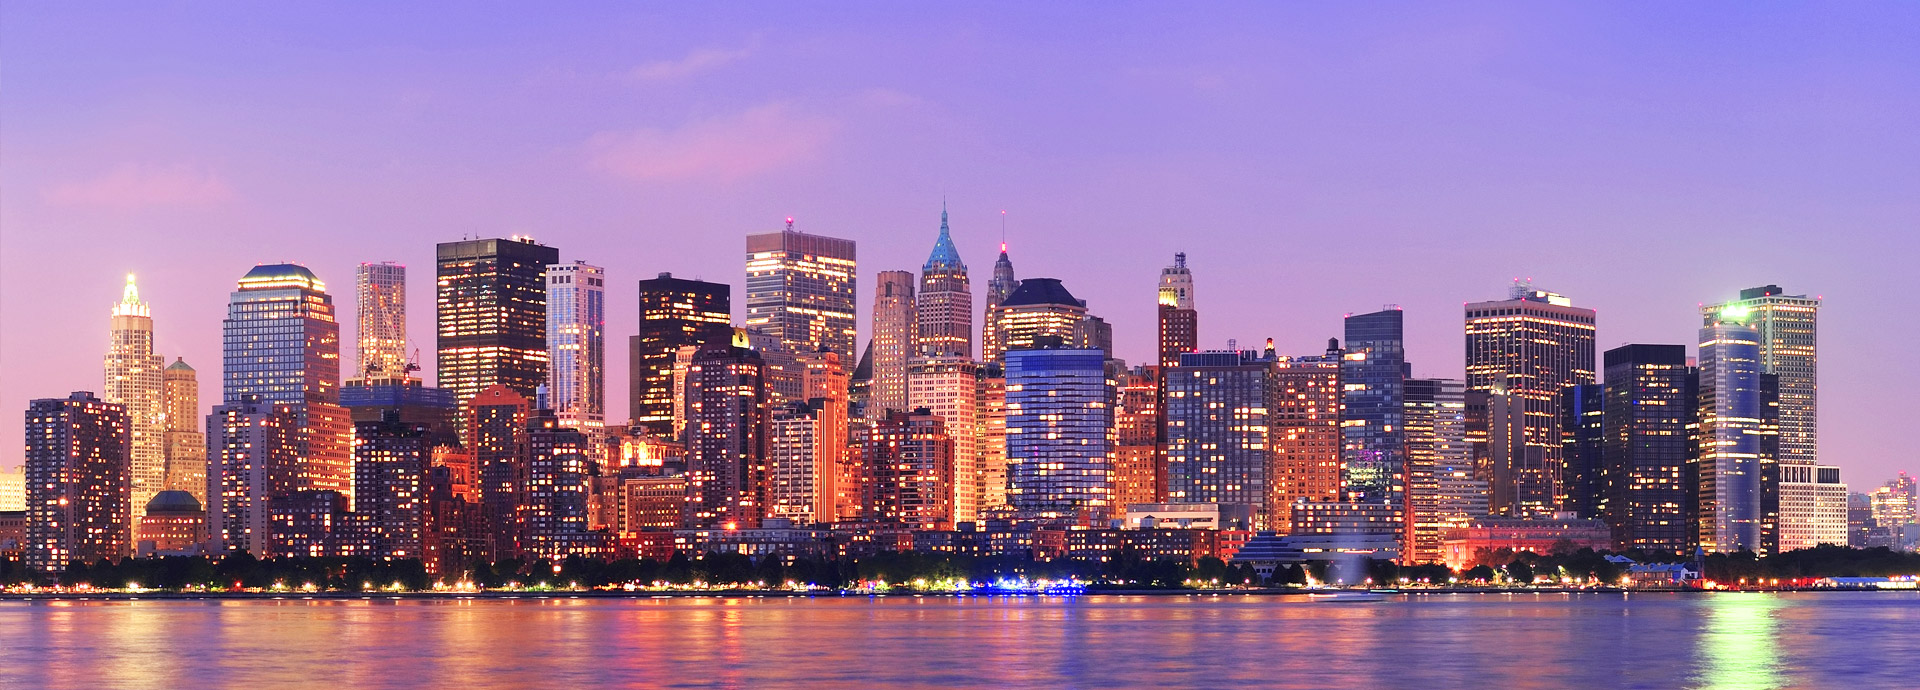 Amazing New York Pictures & Backgrounds